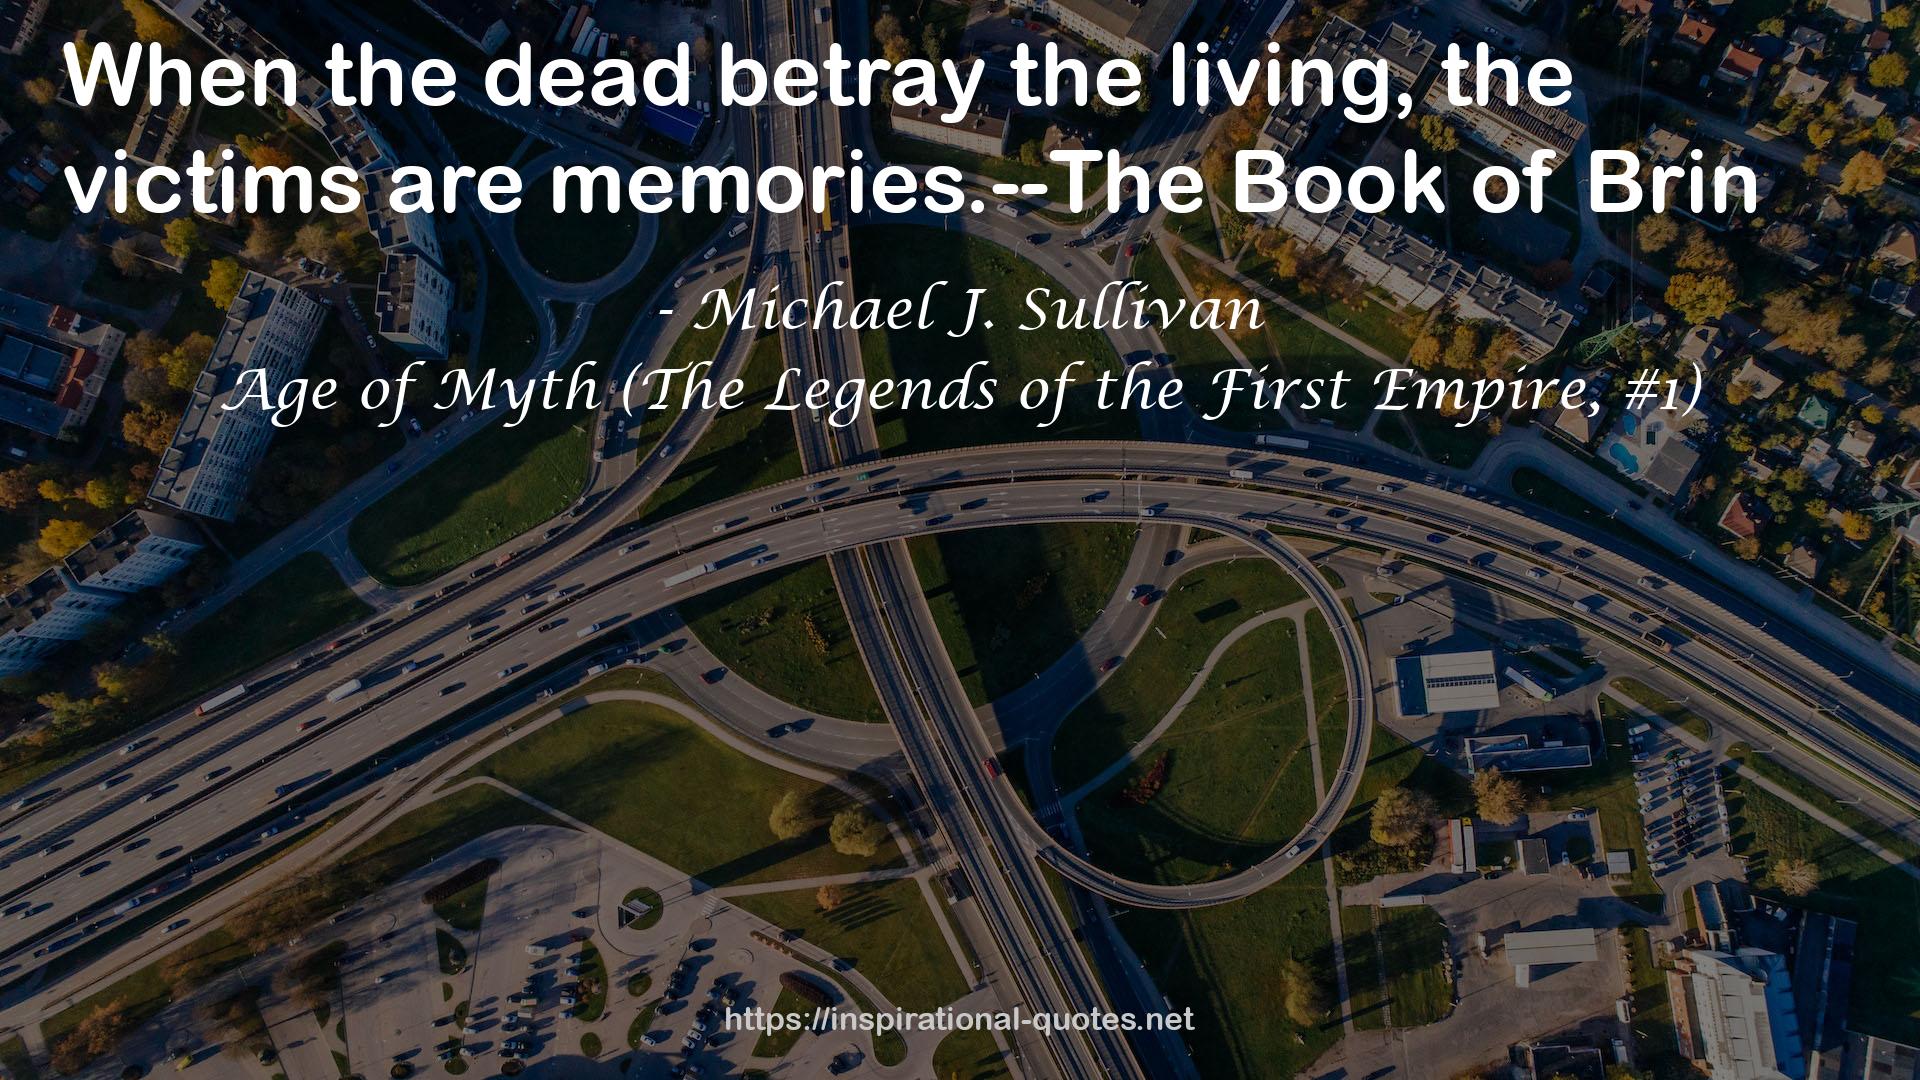 memories.--The Book  QUOTES